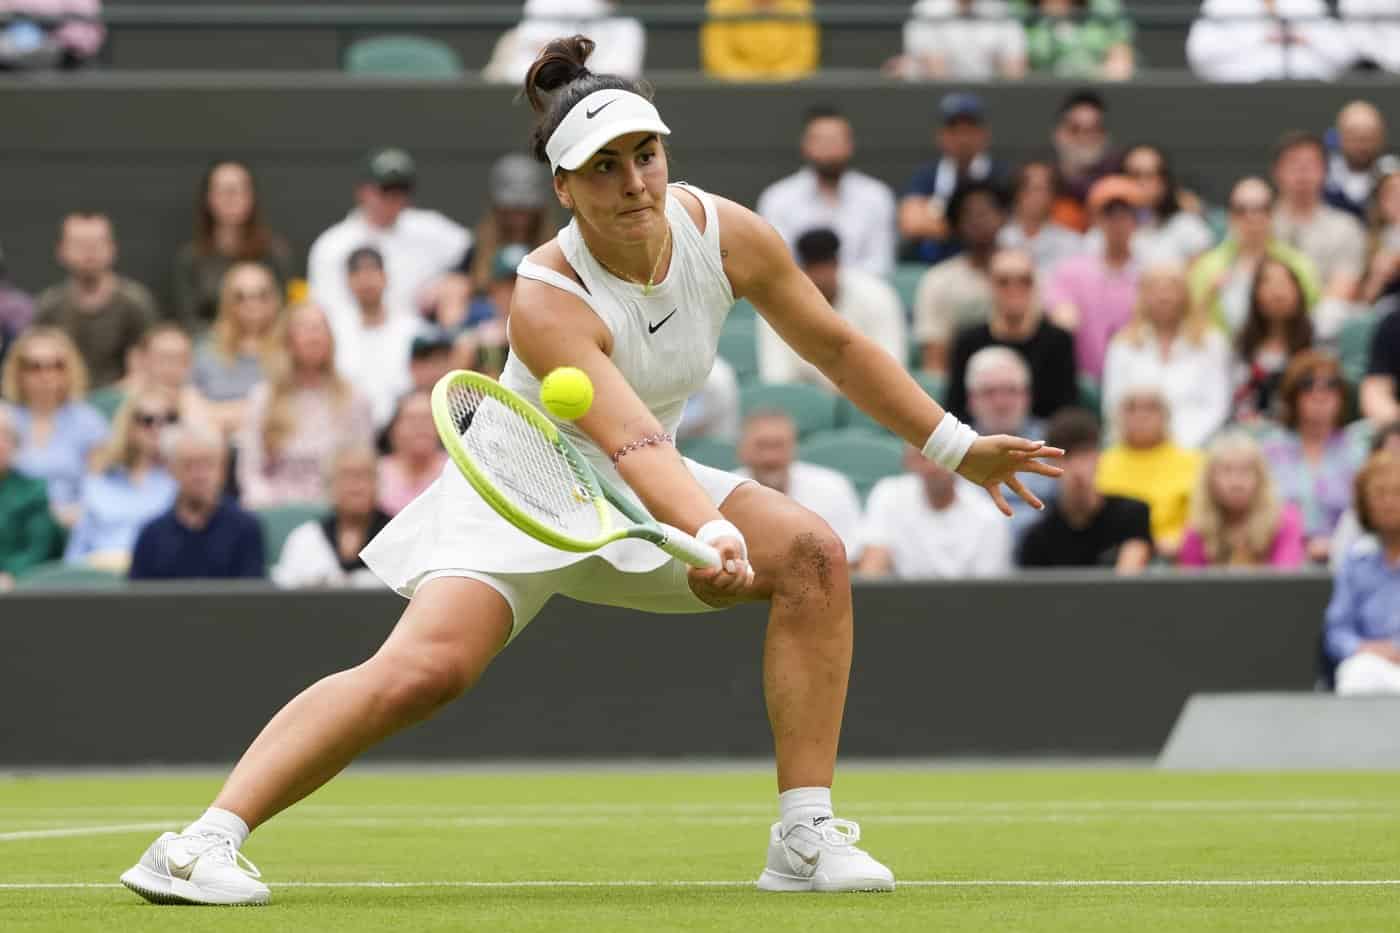 Mississauga's Andreescu drops third-round match to Italy's Paolini at Wimbledon